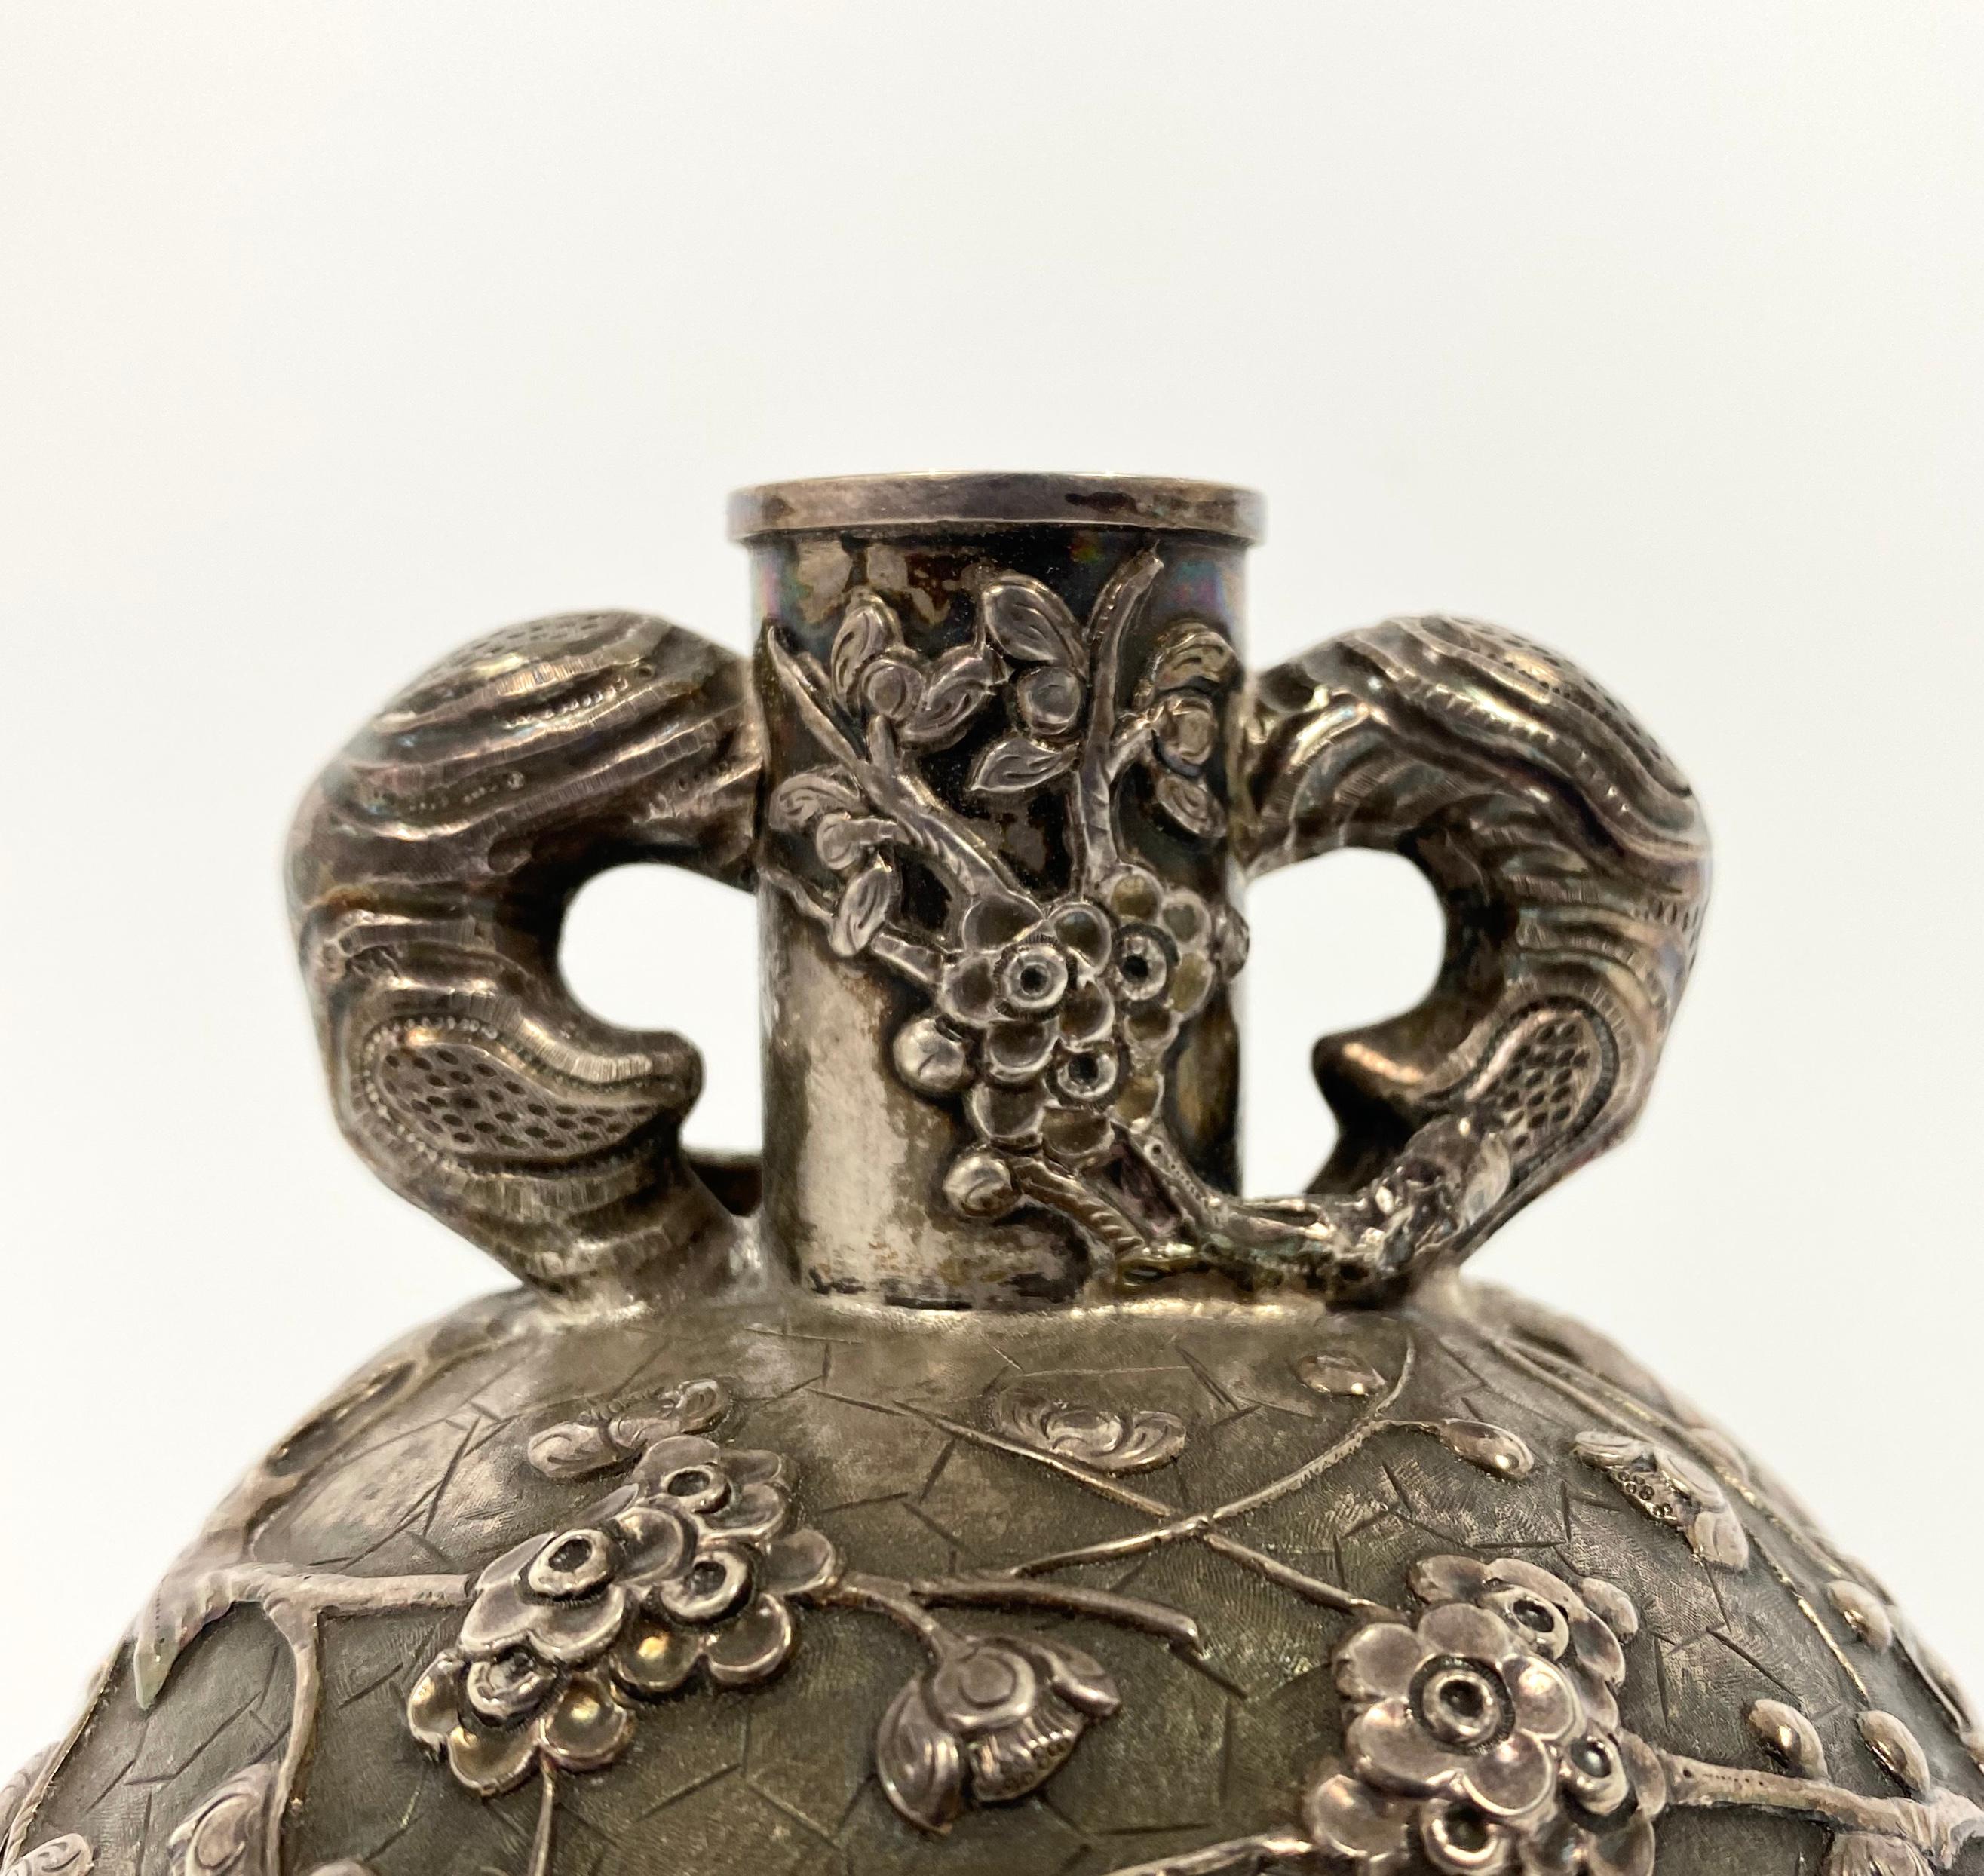 Chinese Silver Flask ‘Cherry blossom on a cracked ice ground’, Luen Wo, Shanghai 1